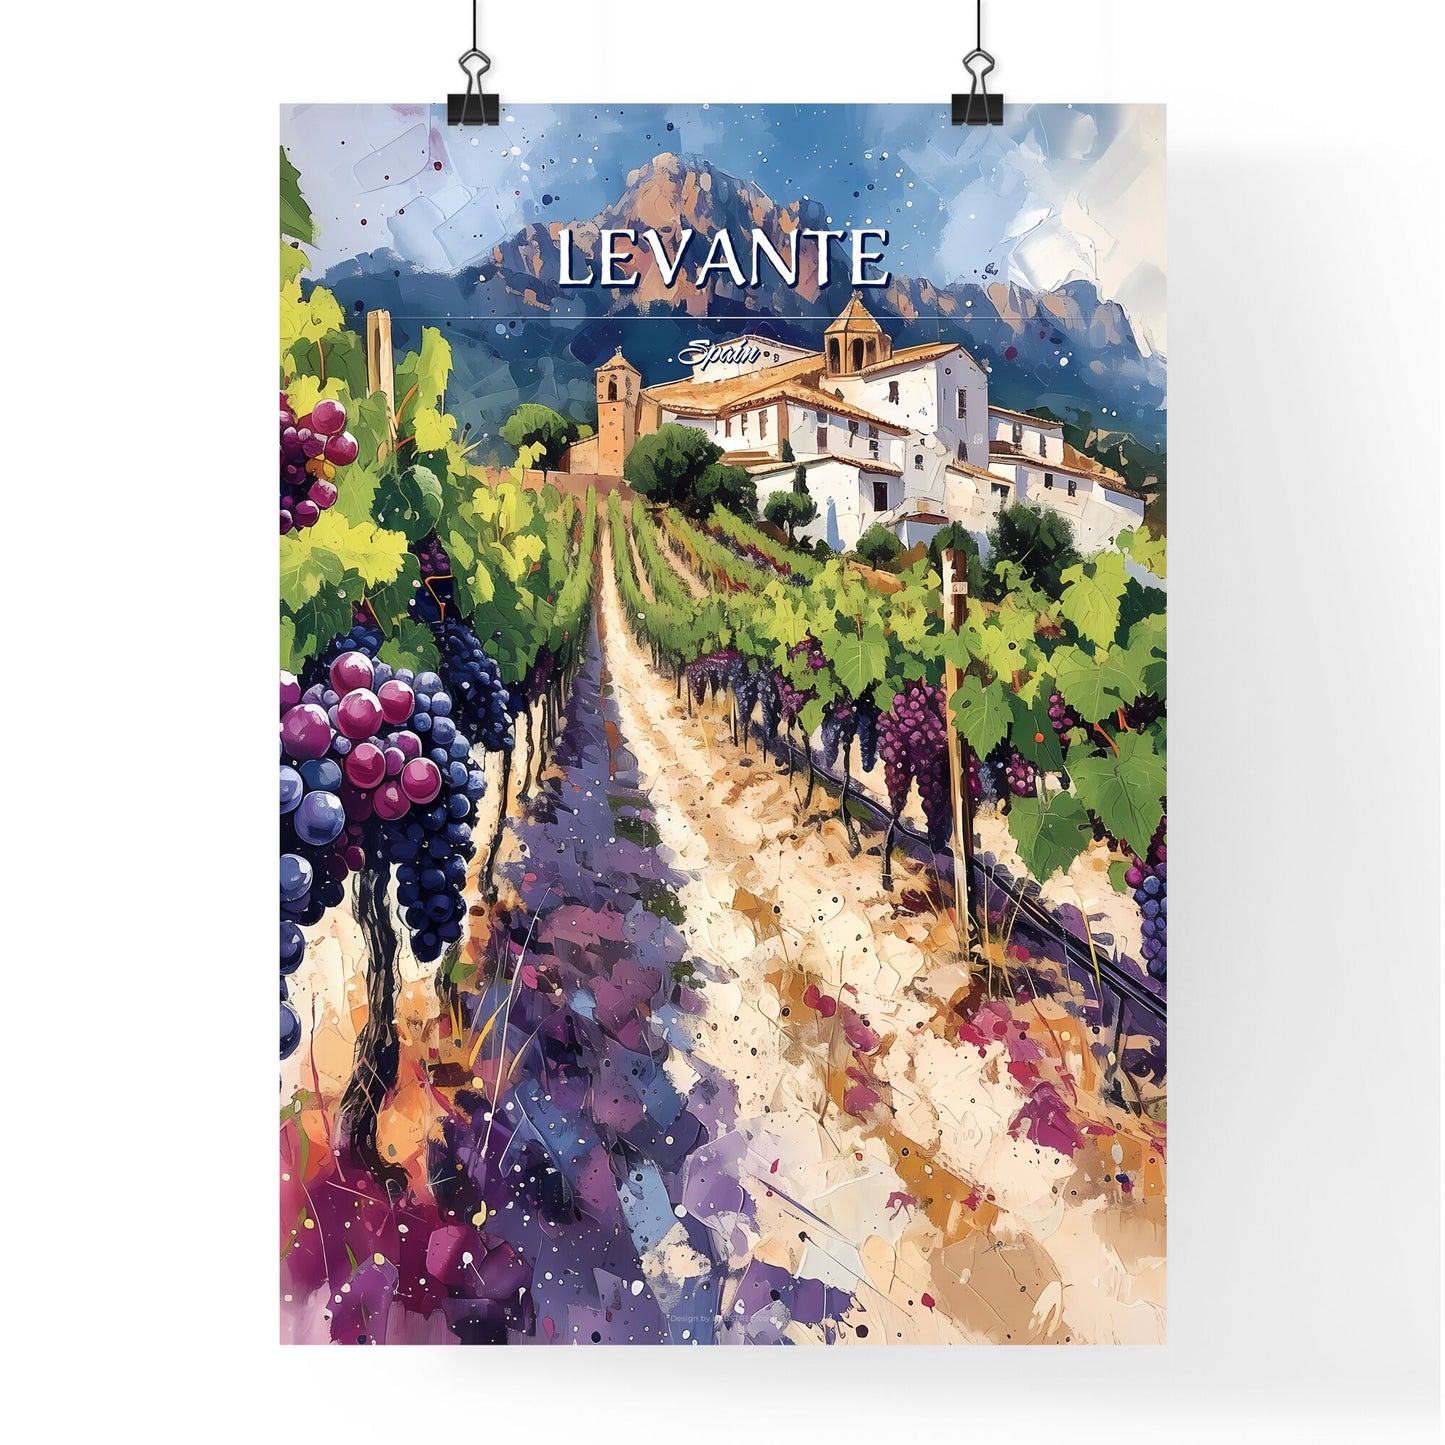 Levante, Spain - Art print of a painting of a vineyard with grapes Default Title